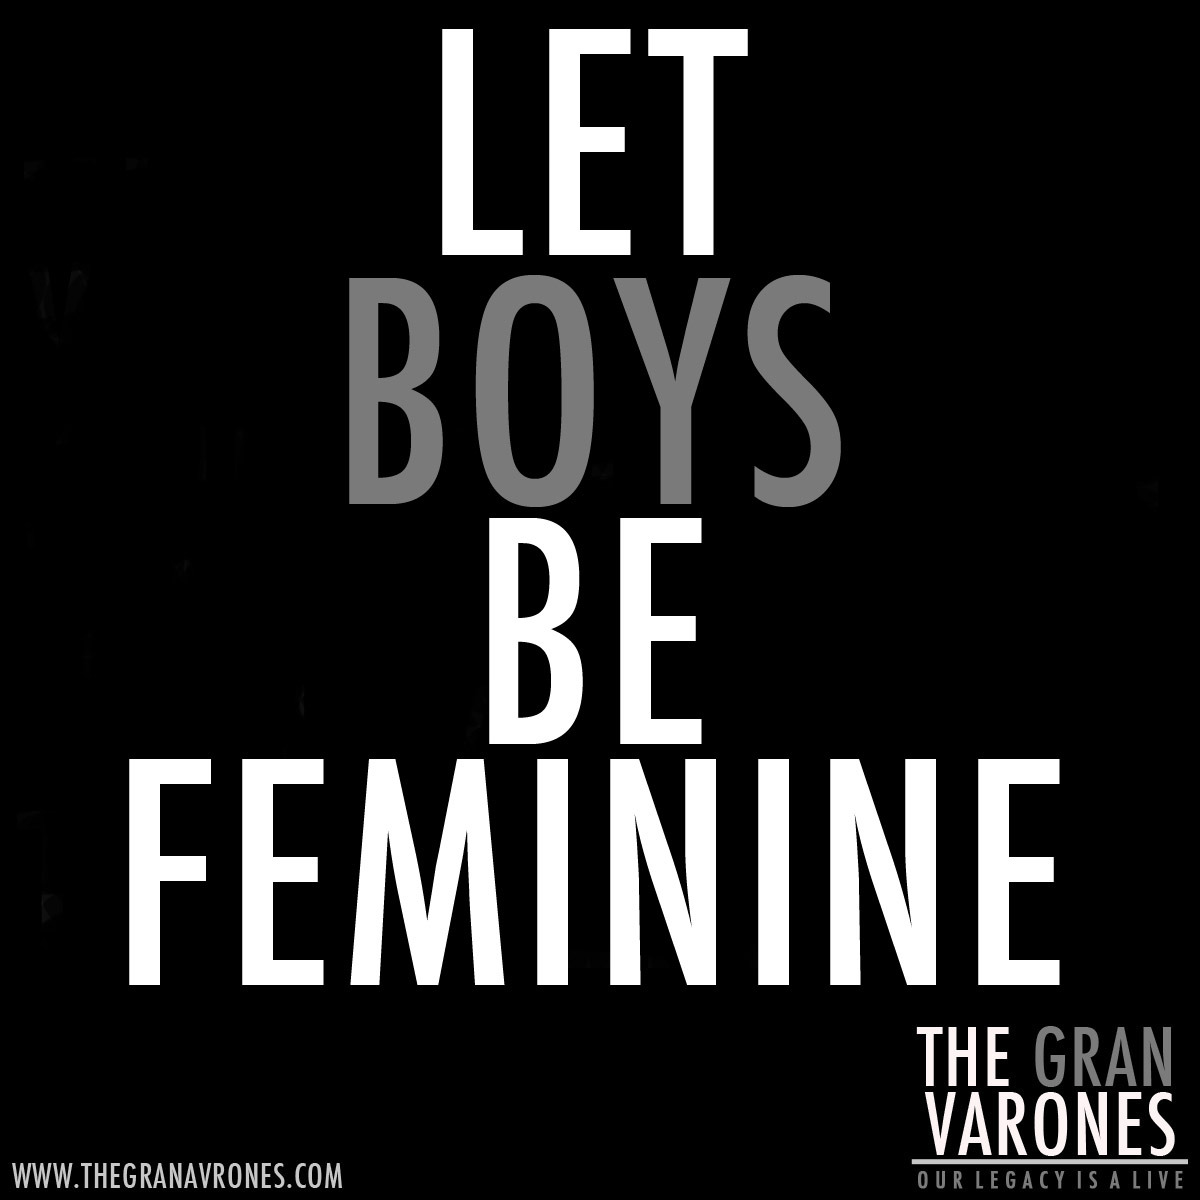 everyday, we redefine and reimagine ourselves. this is just one of the things that make us beautiful.
do not allow this country’s obsession with masculinity destroy the magic and wonder of fem boys.